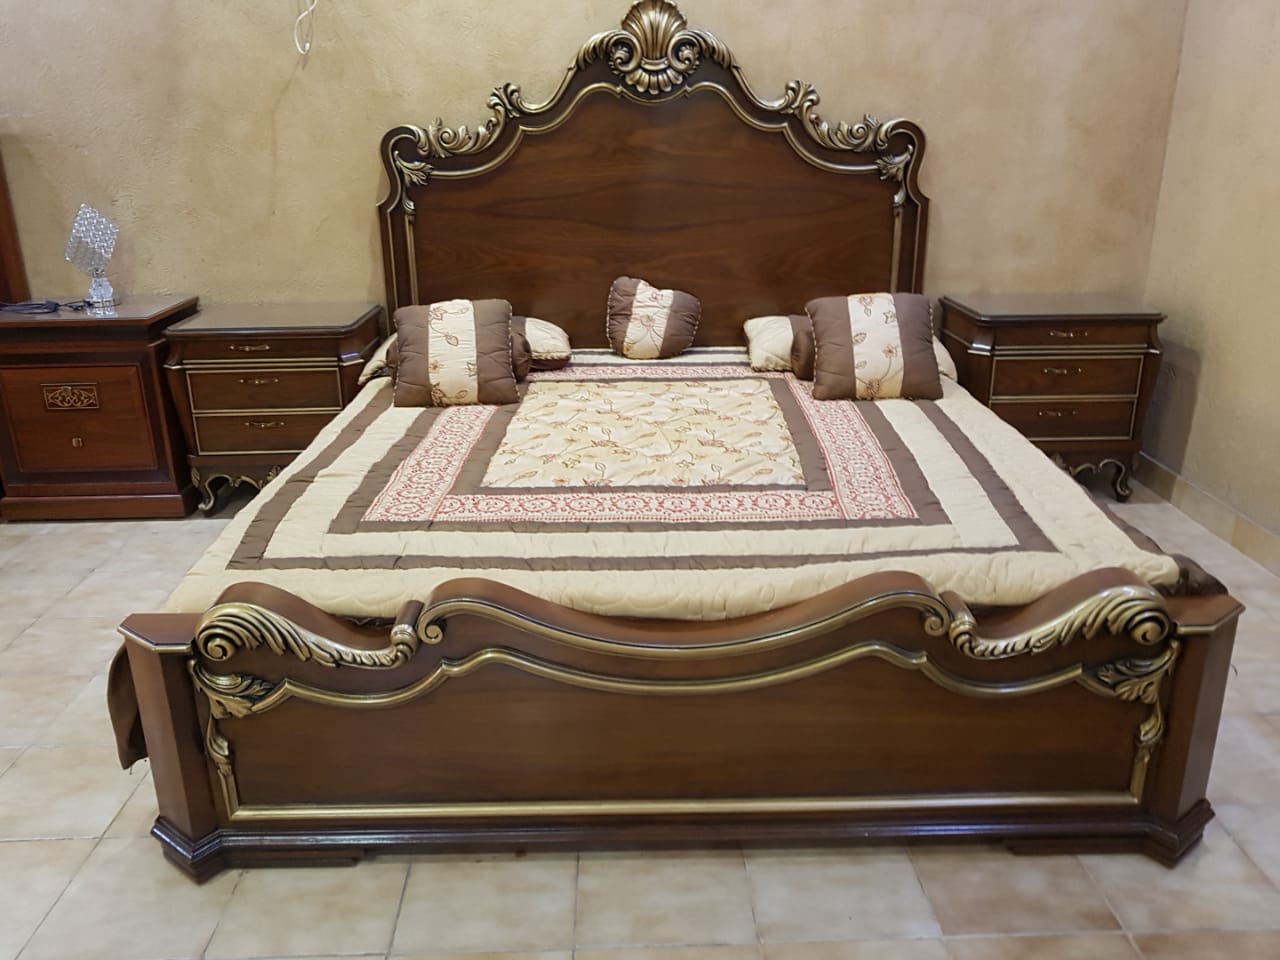 Bridal Bedroom Set With Affordable Price In Karachi Pakistan